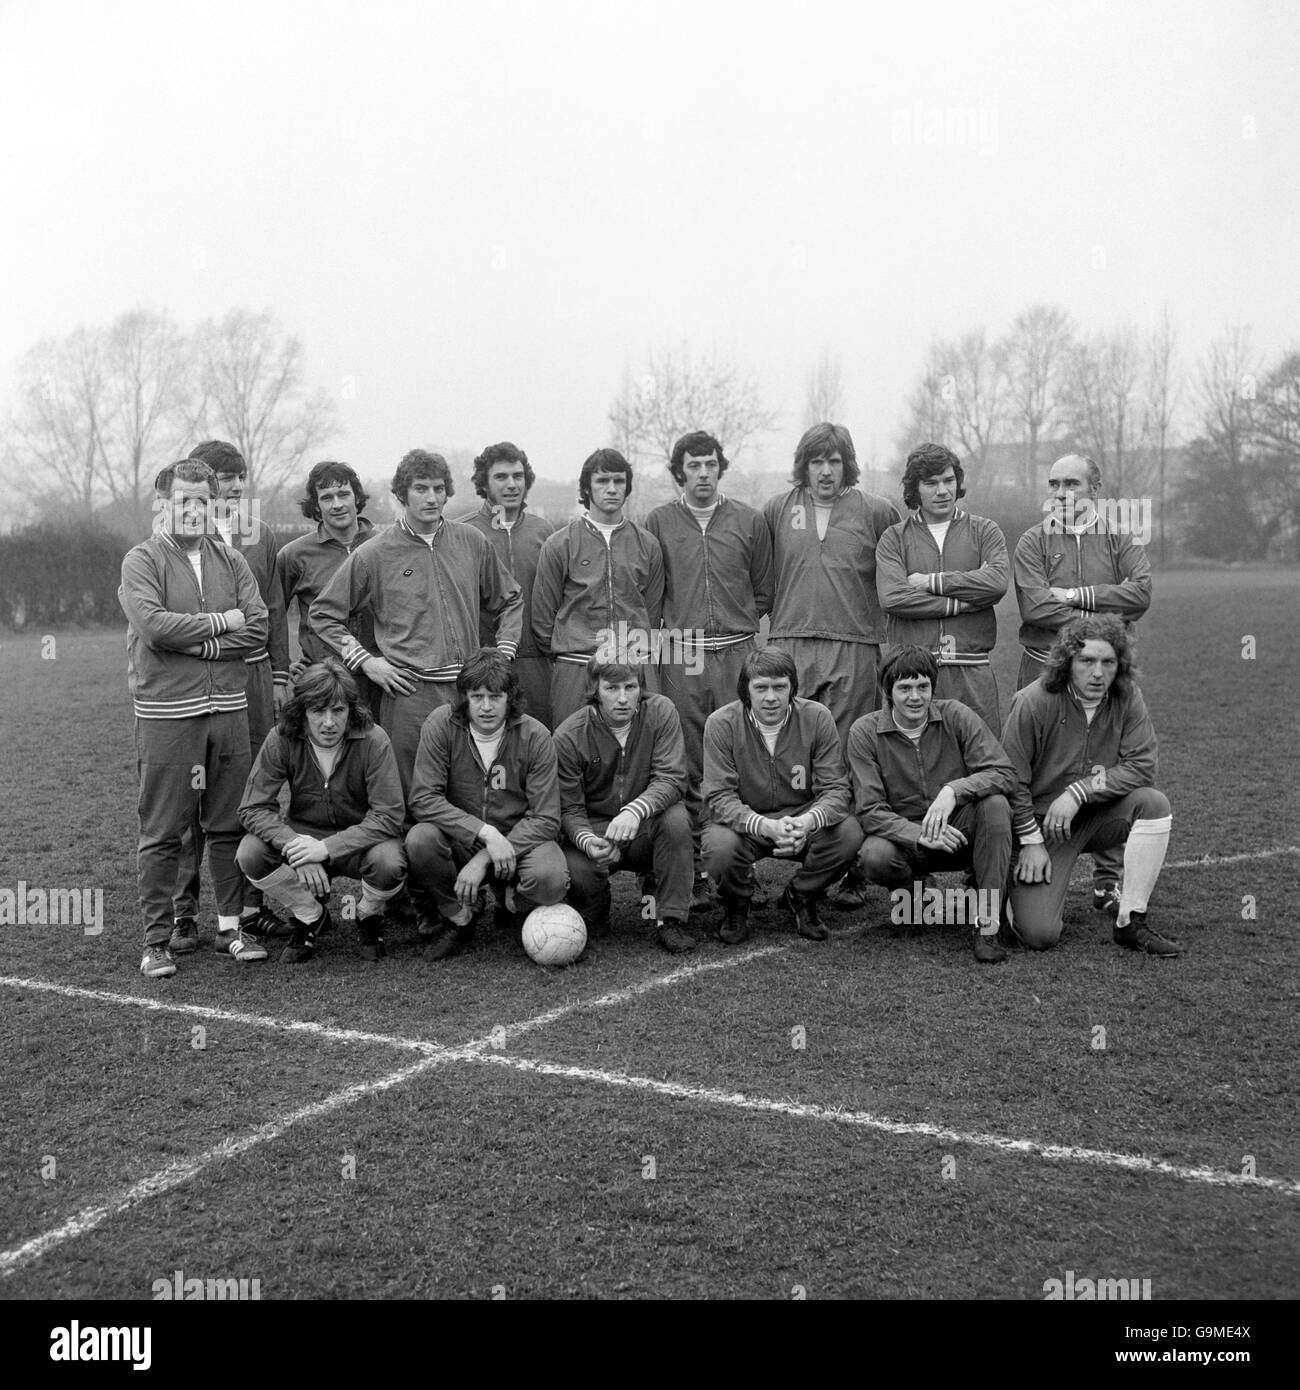 The England squad for the friendly against Portugal: (back row, l-r) trainer Harold Shepherdson, Martin Peters, Peter Storey, Martin Dobson, Trevor Brooking, Dave Watson, Alan Stevenson, Phil Parkes, Malcolm MacDonald, manager Sir Alf Ramsey; (front row, l-r) Stan Bowles, Mick Channon, Colin Todd, David Nish, Duncan McKenzie, Kevin Beattie Stock Photo